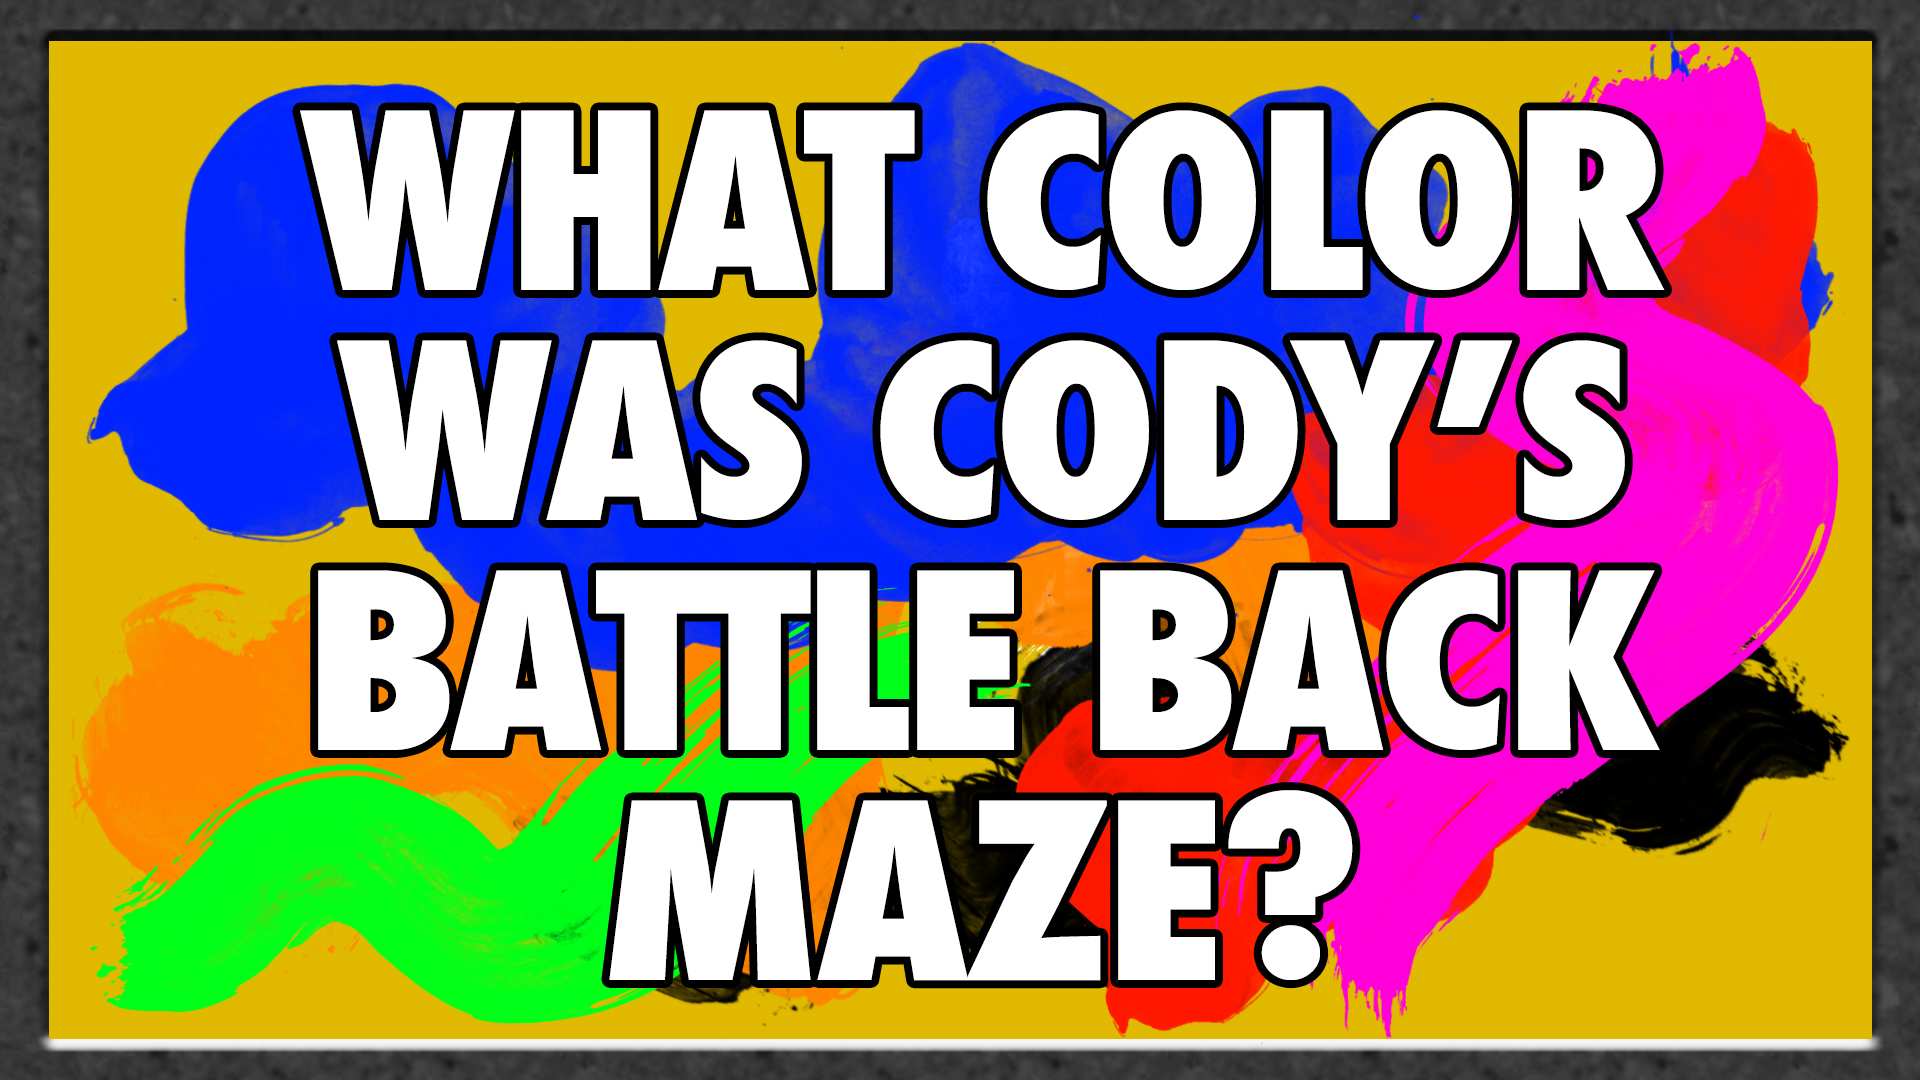 What color was Cody's Battle Back maze?